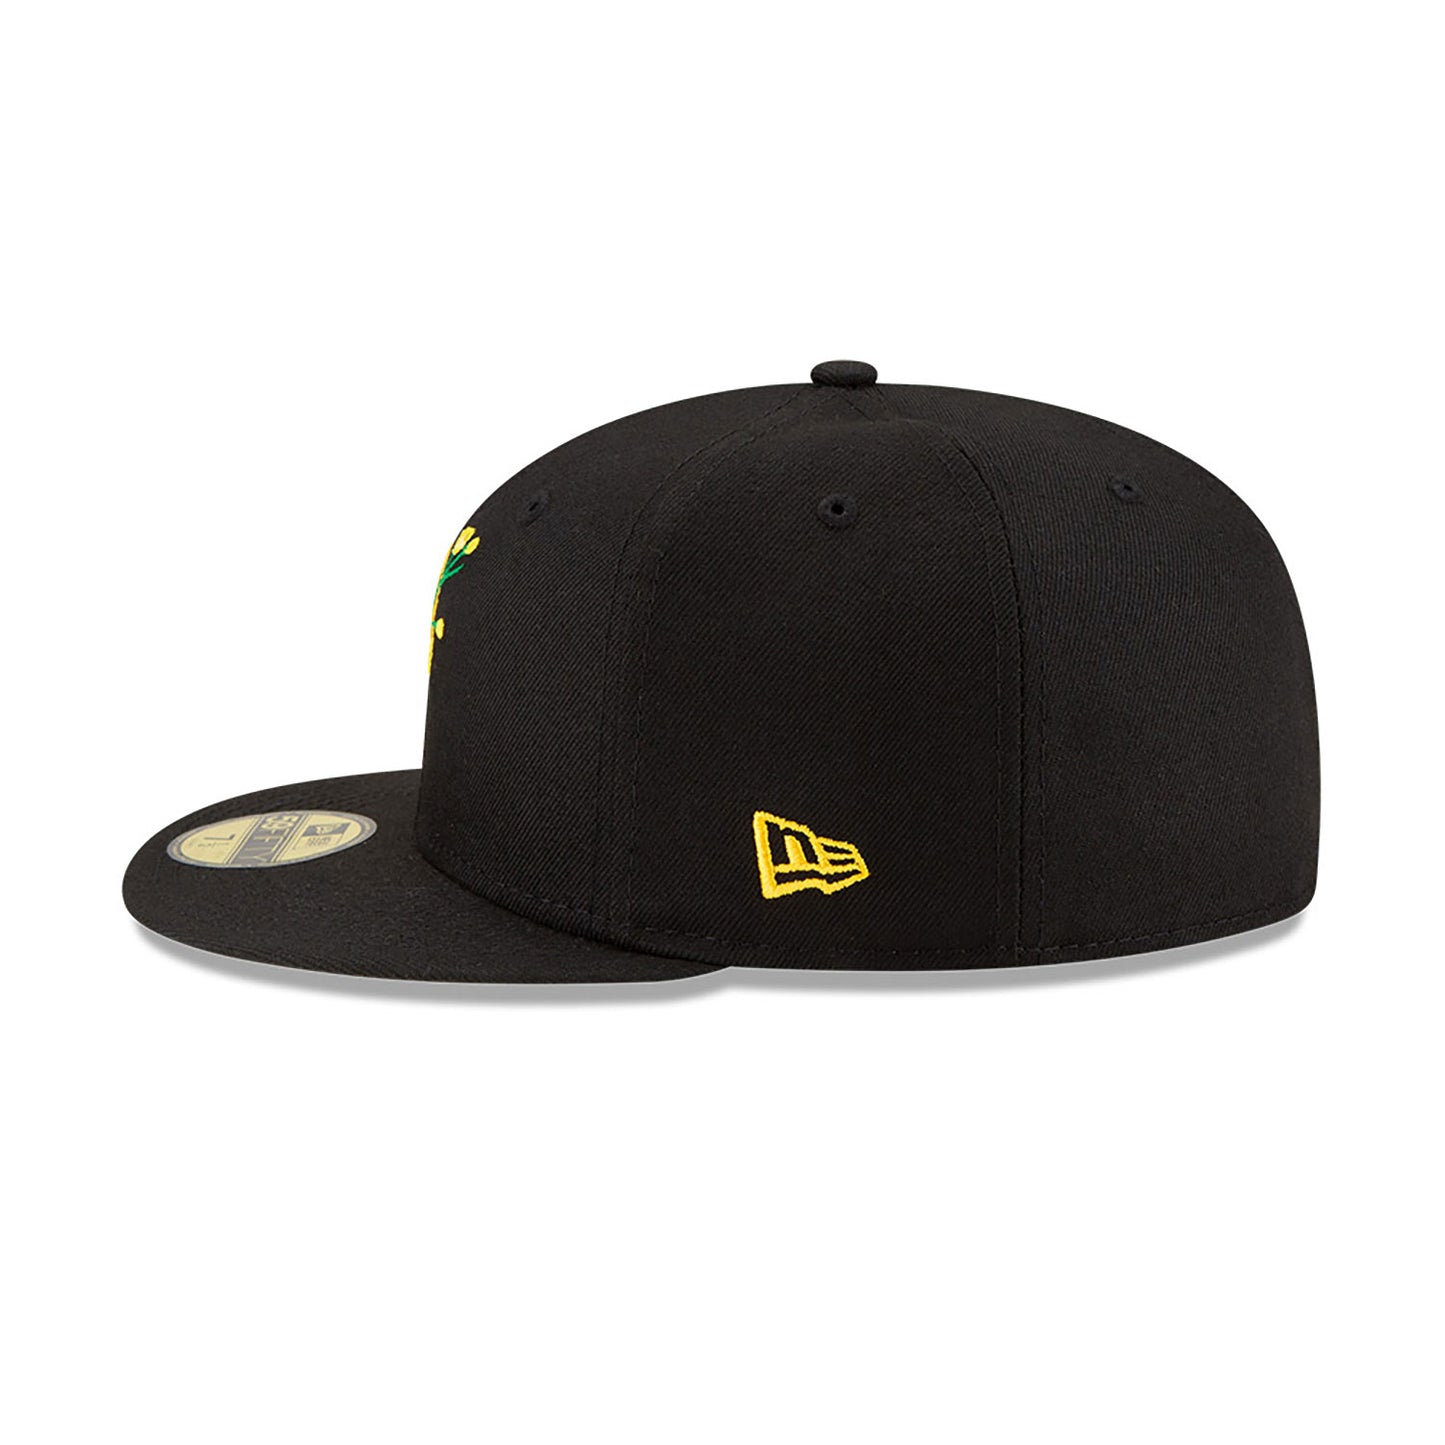 NEW ERA 59FIFTY MLB PITTSBURGH PIRATES SIDE PATCH BLOOM BLACK / SOFT YELLOW UV FITTED CAP